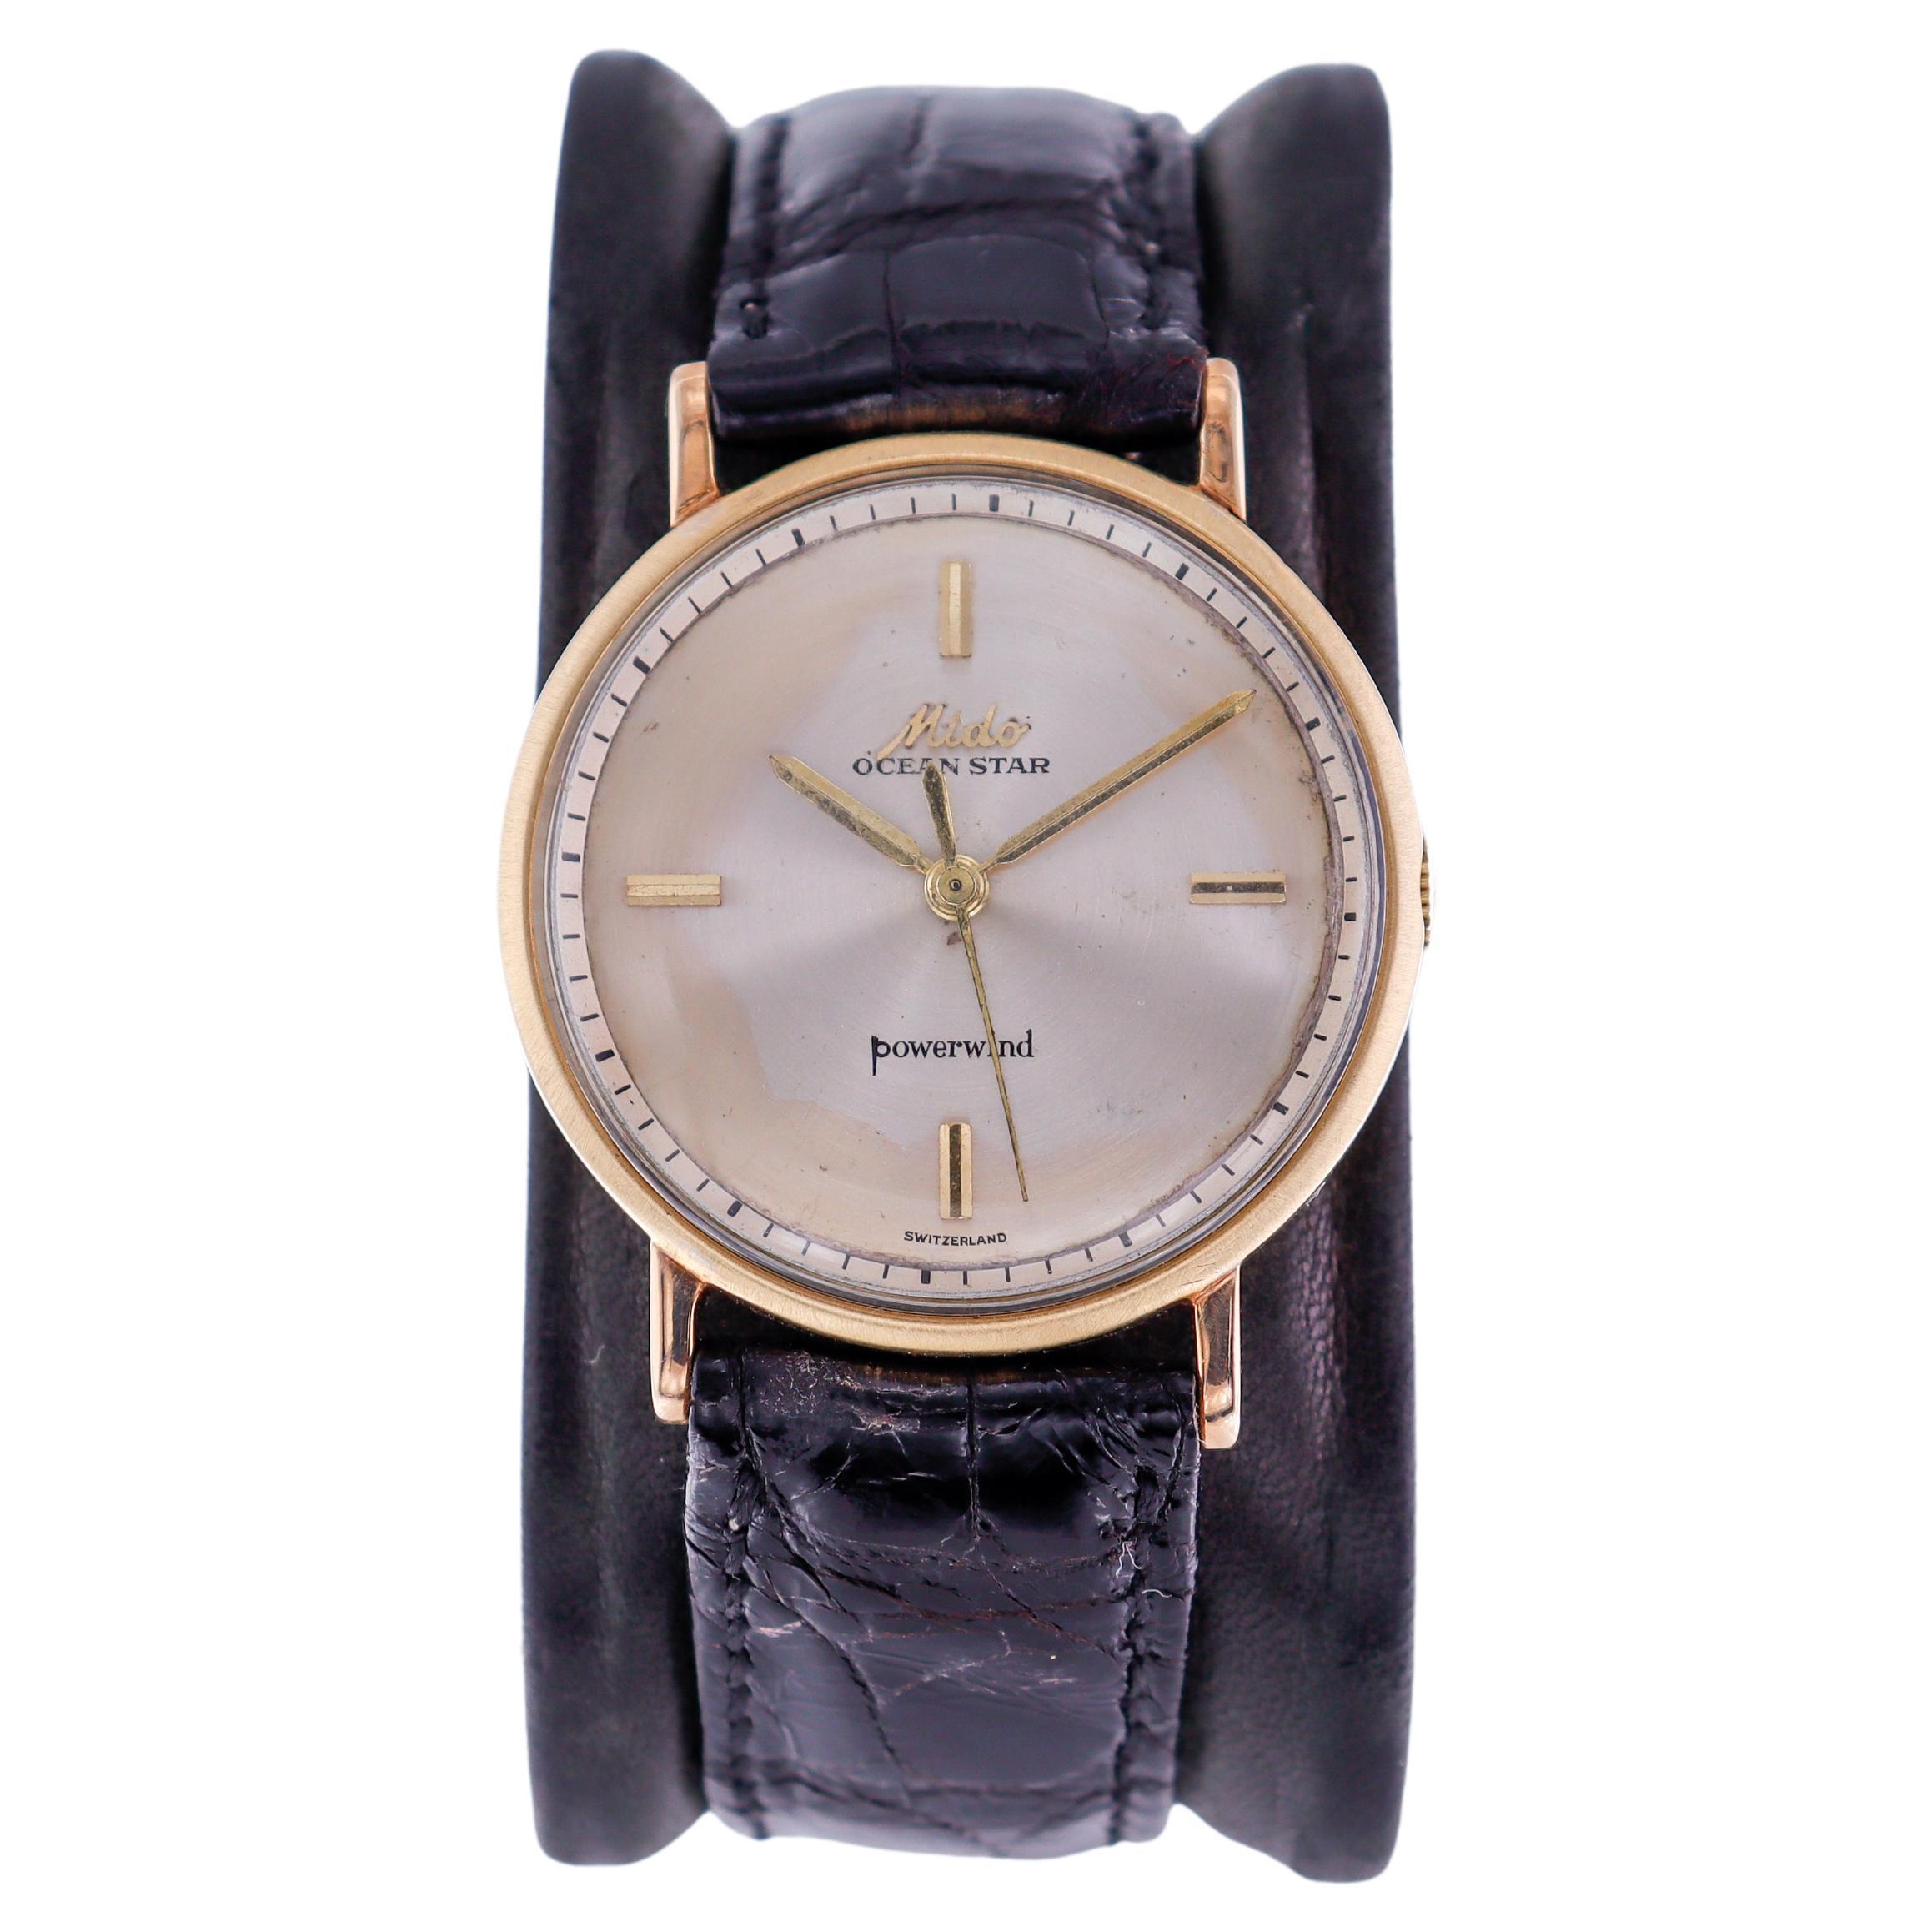 Mido 14Kt. Yellow Gold Ocean Star Art Deco Style Power Wind Watch, circa 1950s For Sale